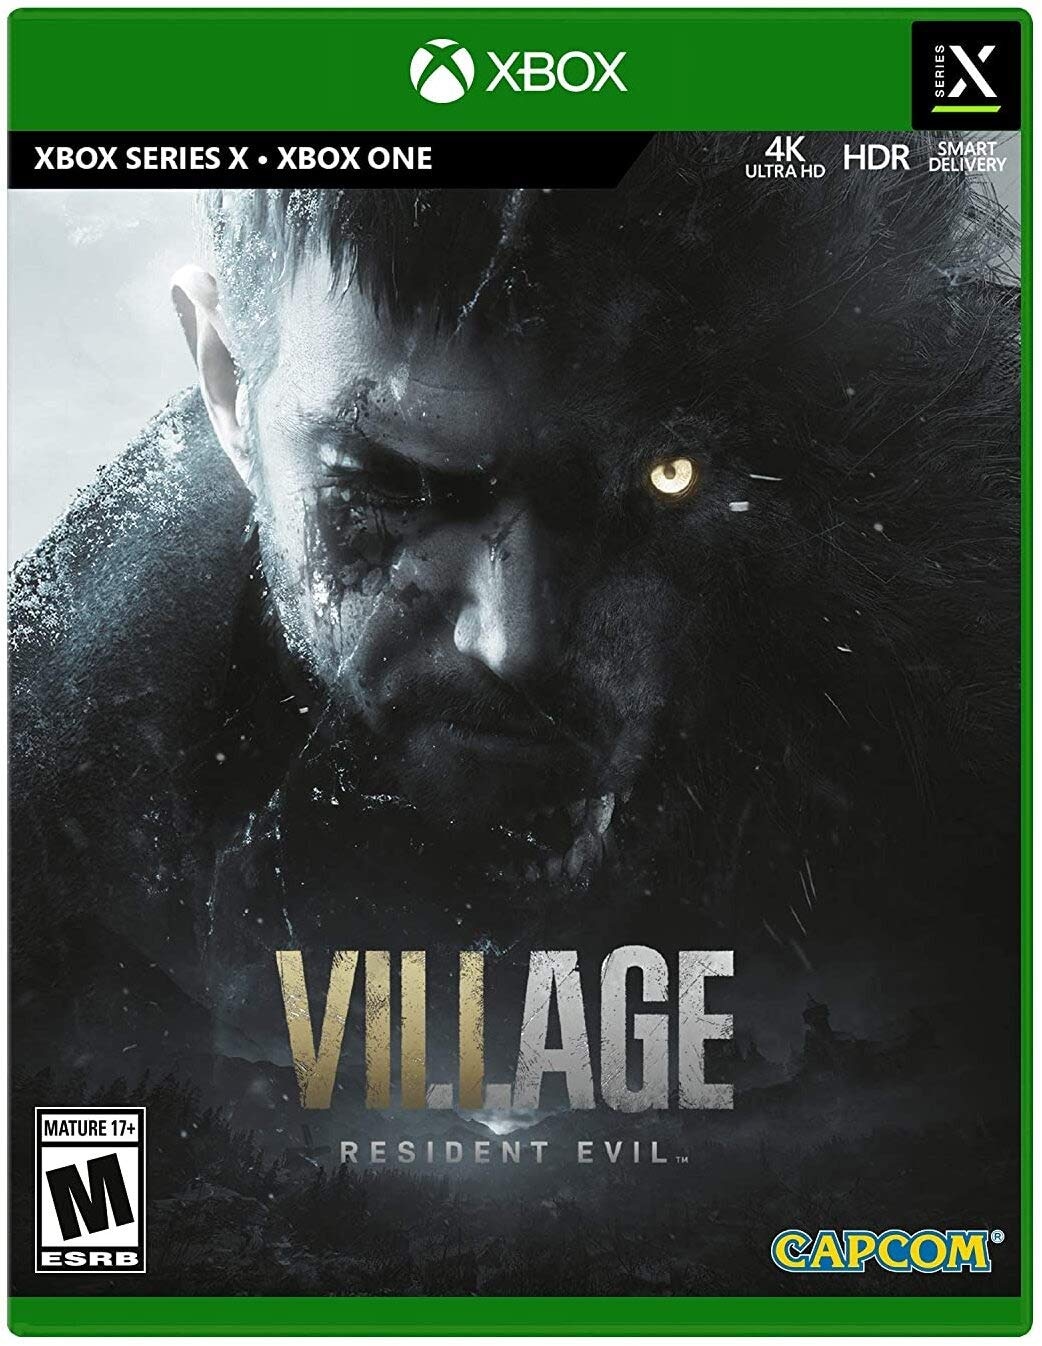 Resident Evil Village - Xbox Series X Standard Edition (Xbox One, Series X/S) Gaming - 1